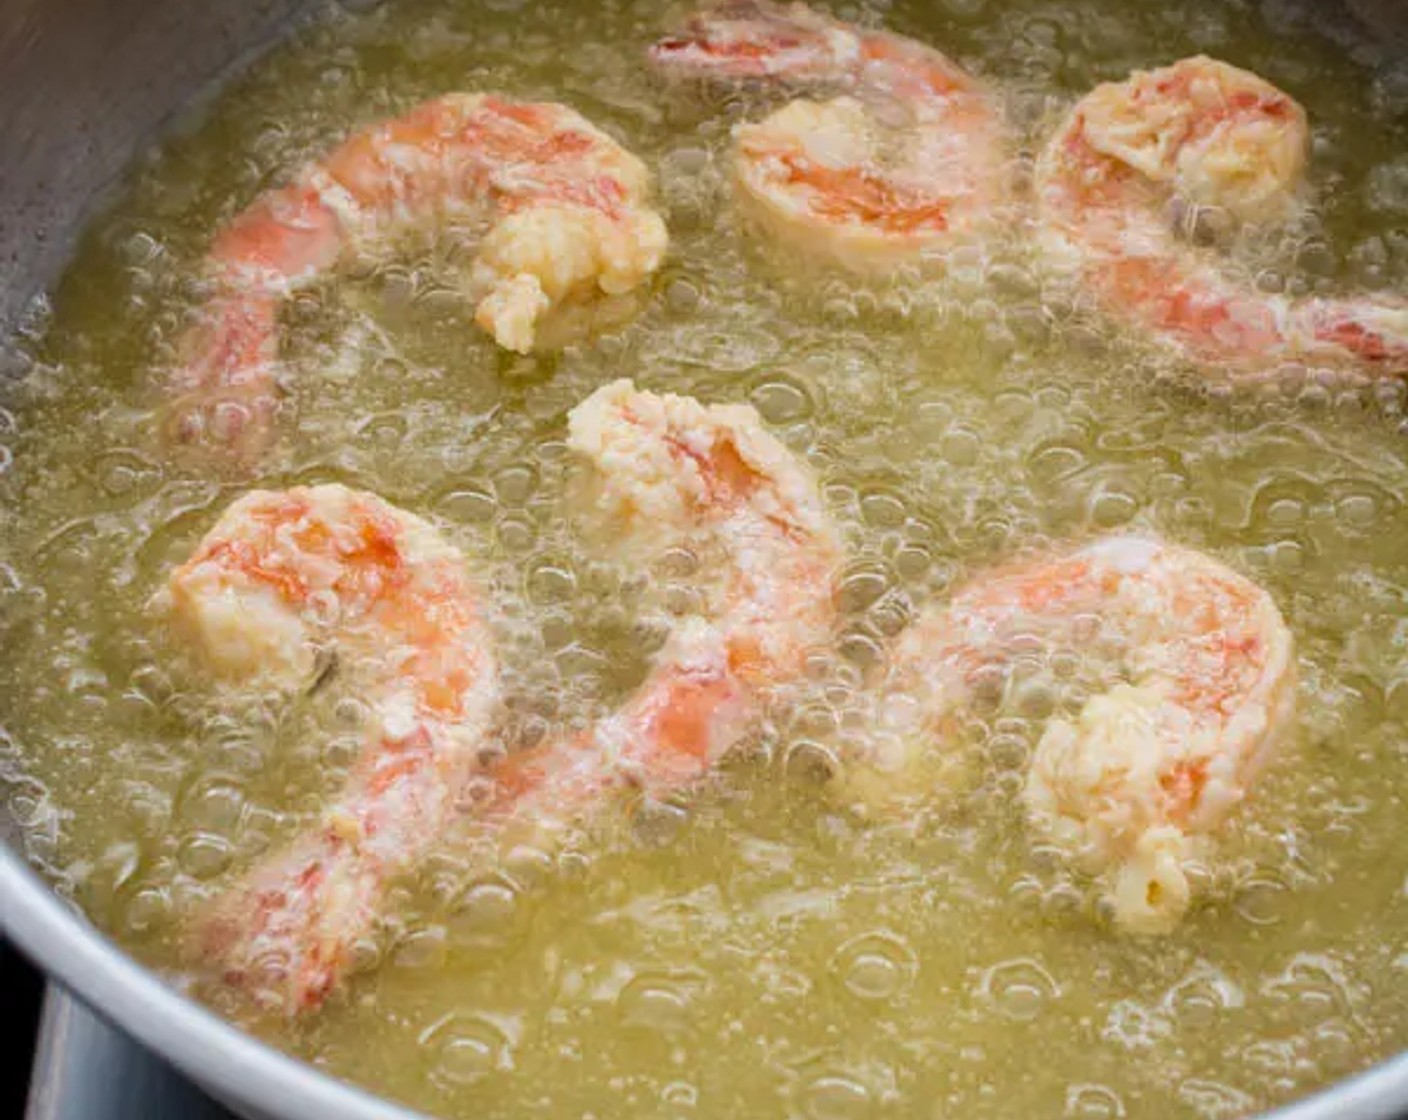 step 7 Fry the shrimp in small batches, shaking off the excess cornstarch as you carefully place each shrimp in the oil. Fry till the shrimp turn to a pale golden brown color for about 1-2 minutes per batch.